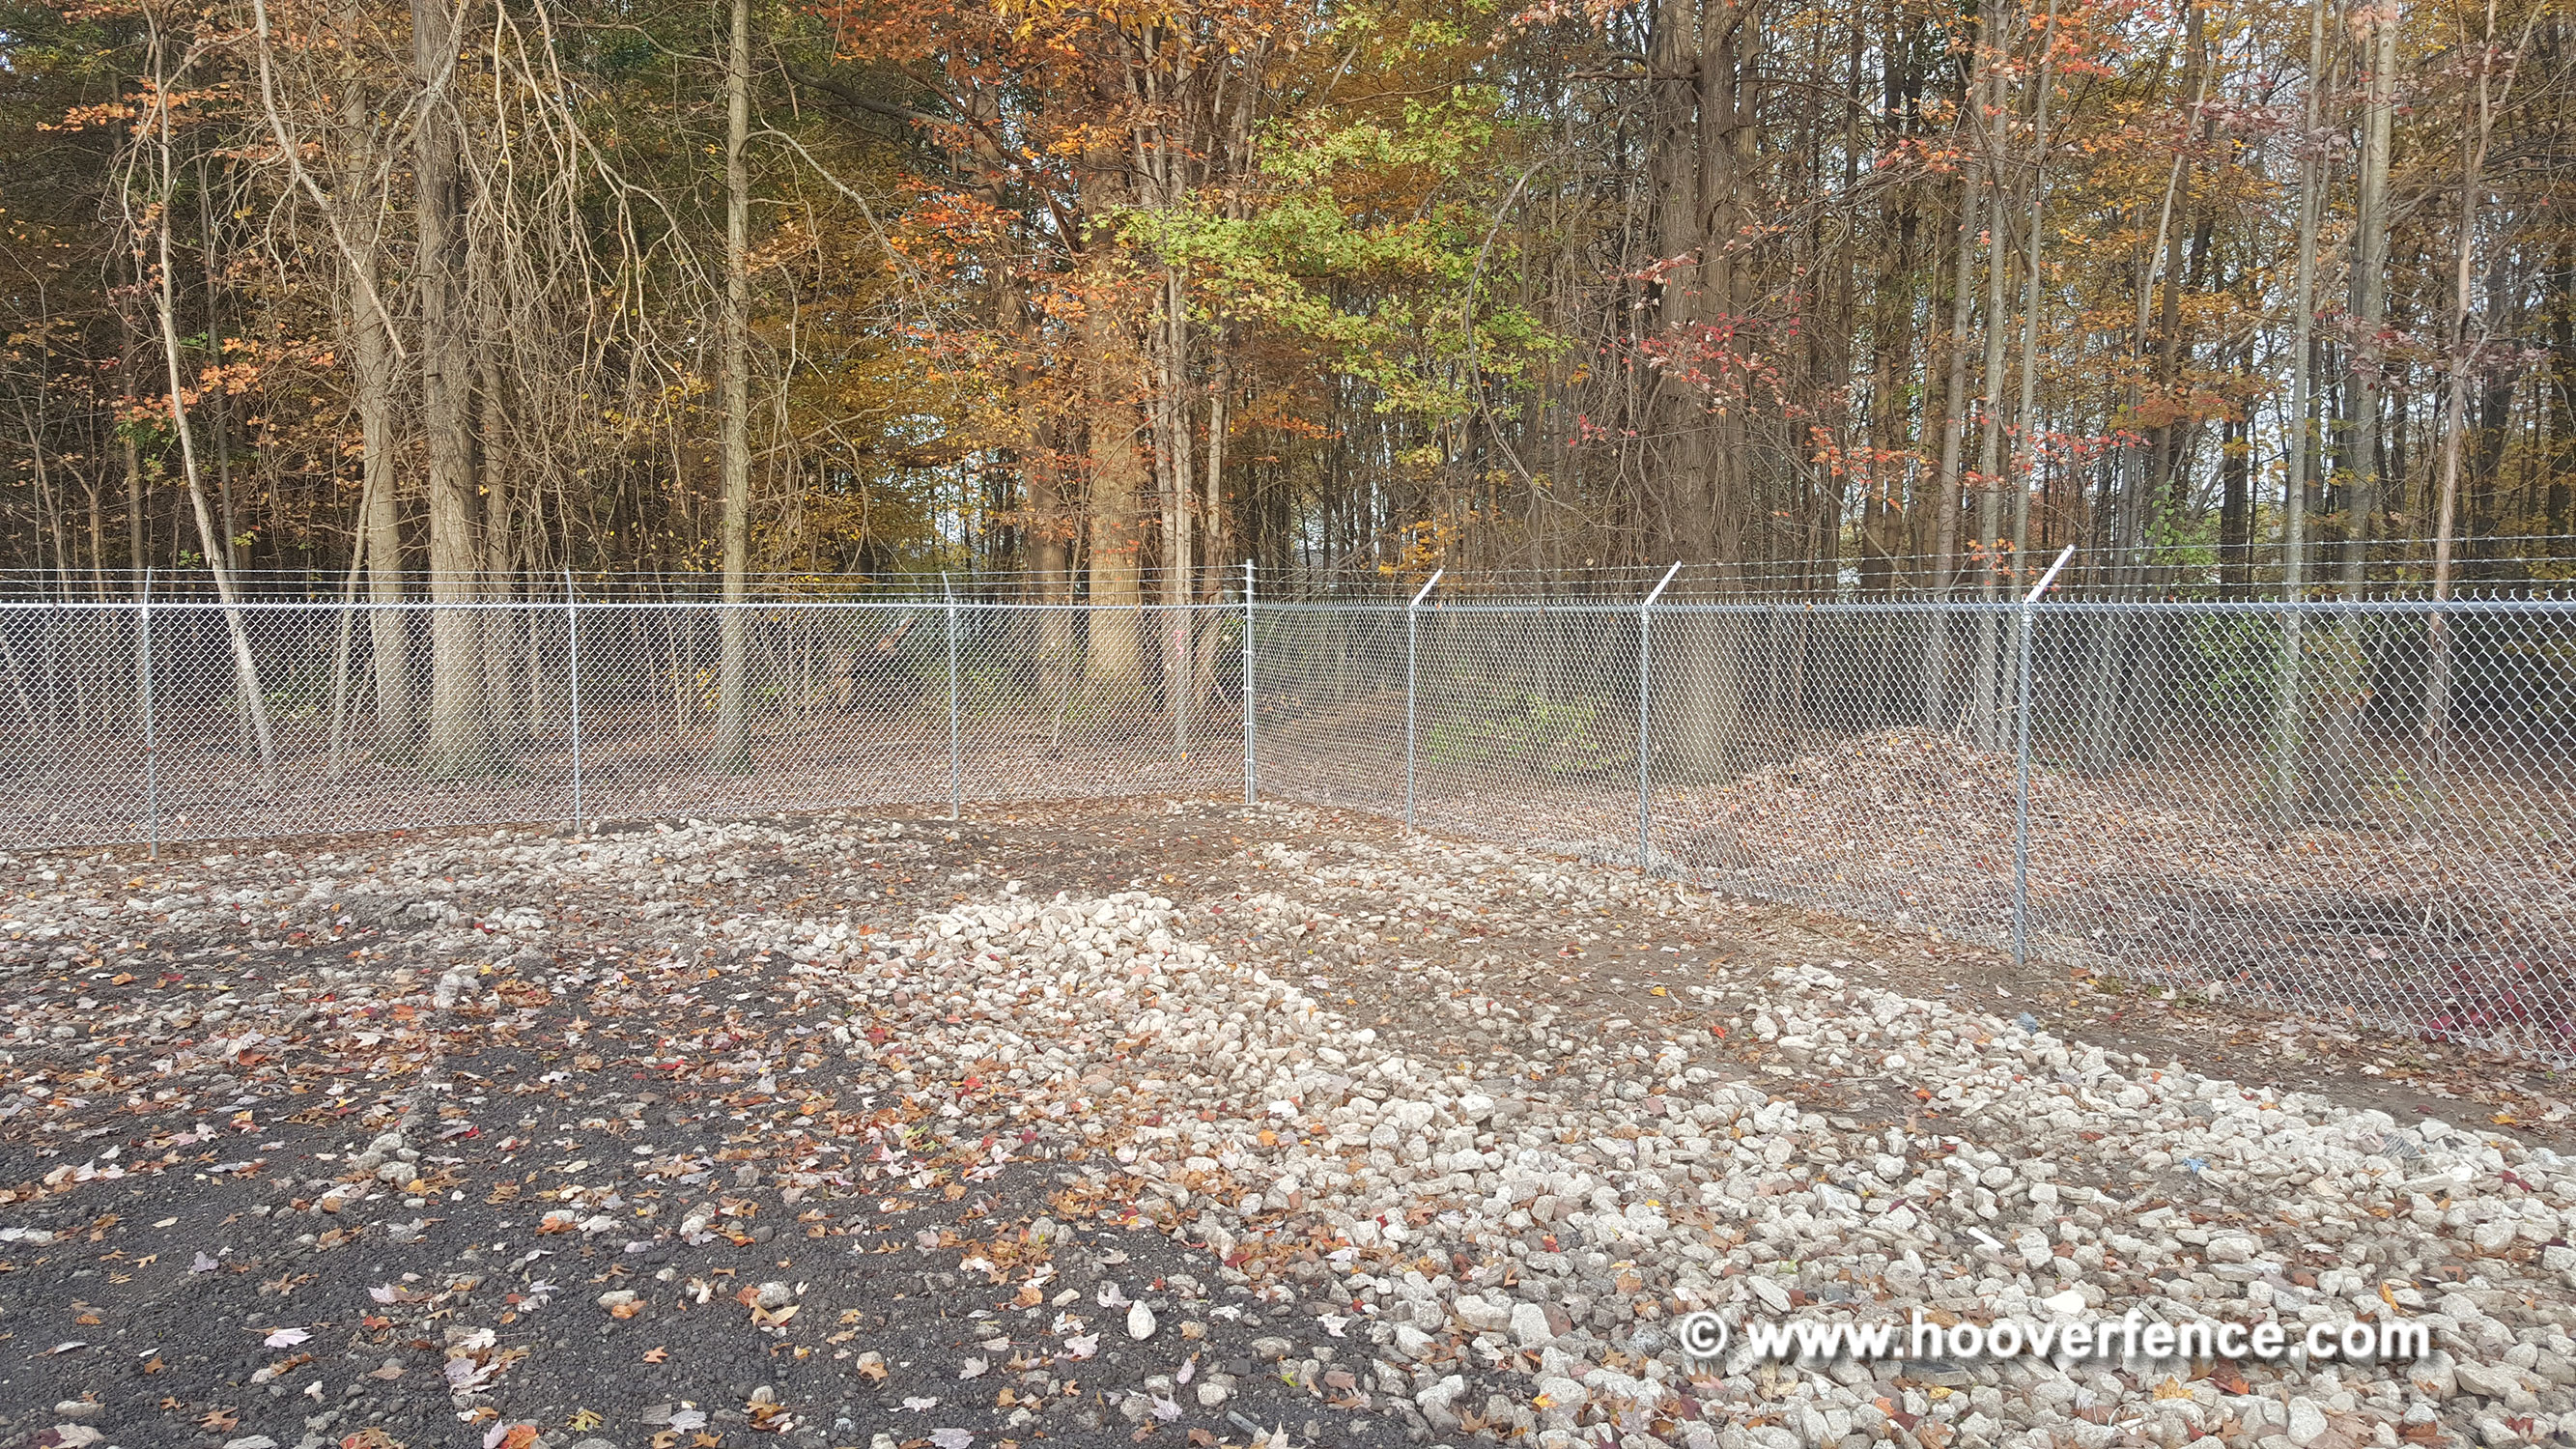 6' High Chain Link Fence with Barbed Wire Installation - Atwater, Ohio